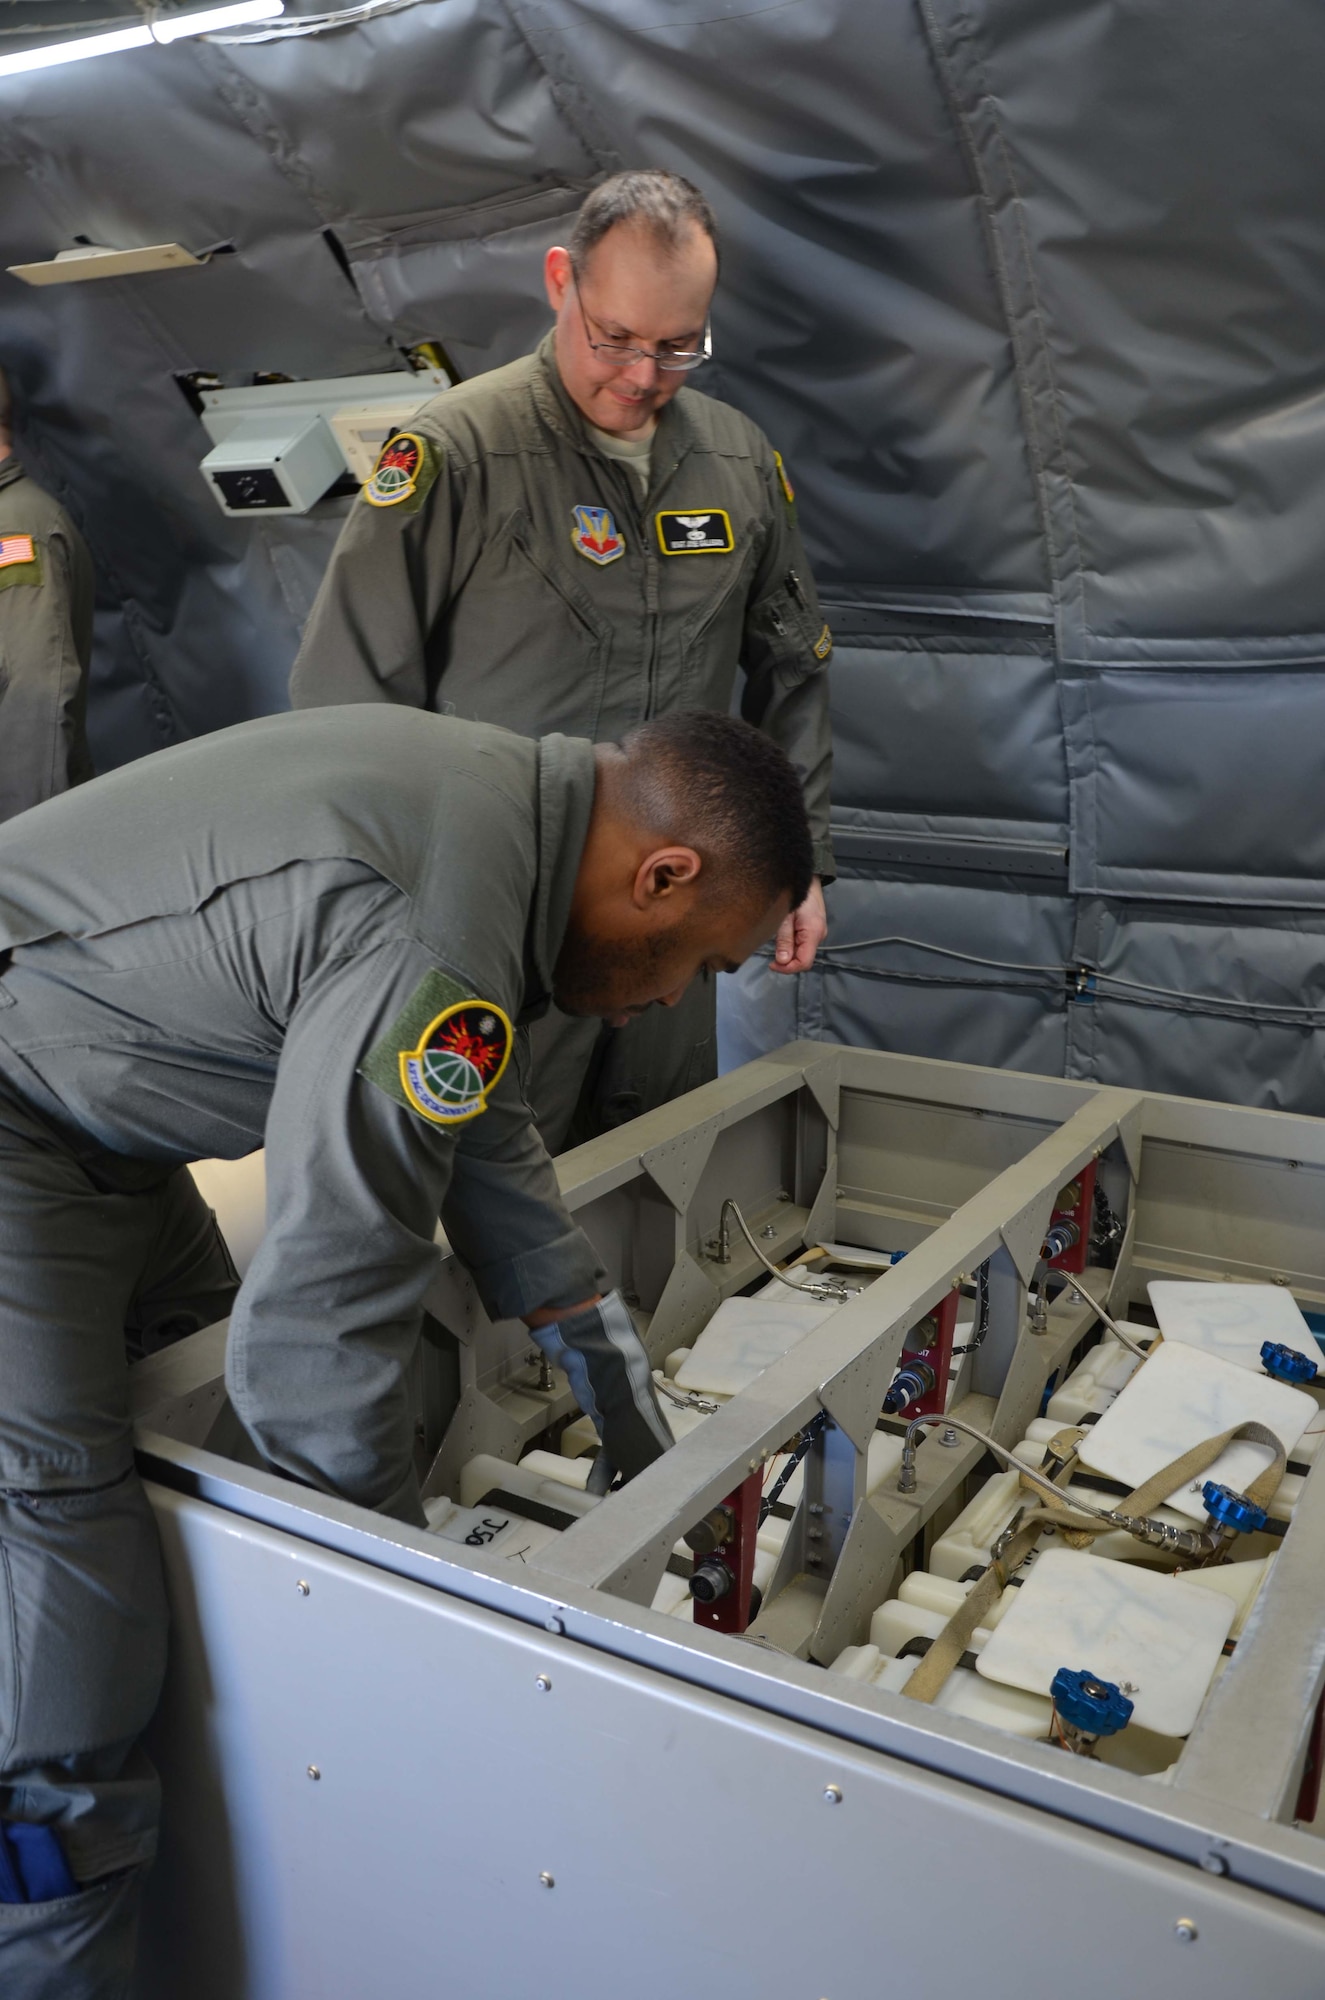 U.S. Air Force Senior Airman Victor Williams (front) repositions a whole air sphere aboard the WC-135 Constant Phoenix as Master Sgt. Jose Gallegos observes.  The Airmen, both special equipment operators, are members of the Air Force Technical Applications Center's Detachment 1 based at Offutt AFB, Neb., and were at Patrick AFB, Fla., to offer tours of the nuclear treaty monitoring aircraft.  (U.S. Air Force photo by Susan A. Romano)